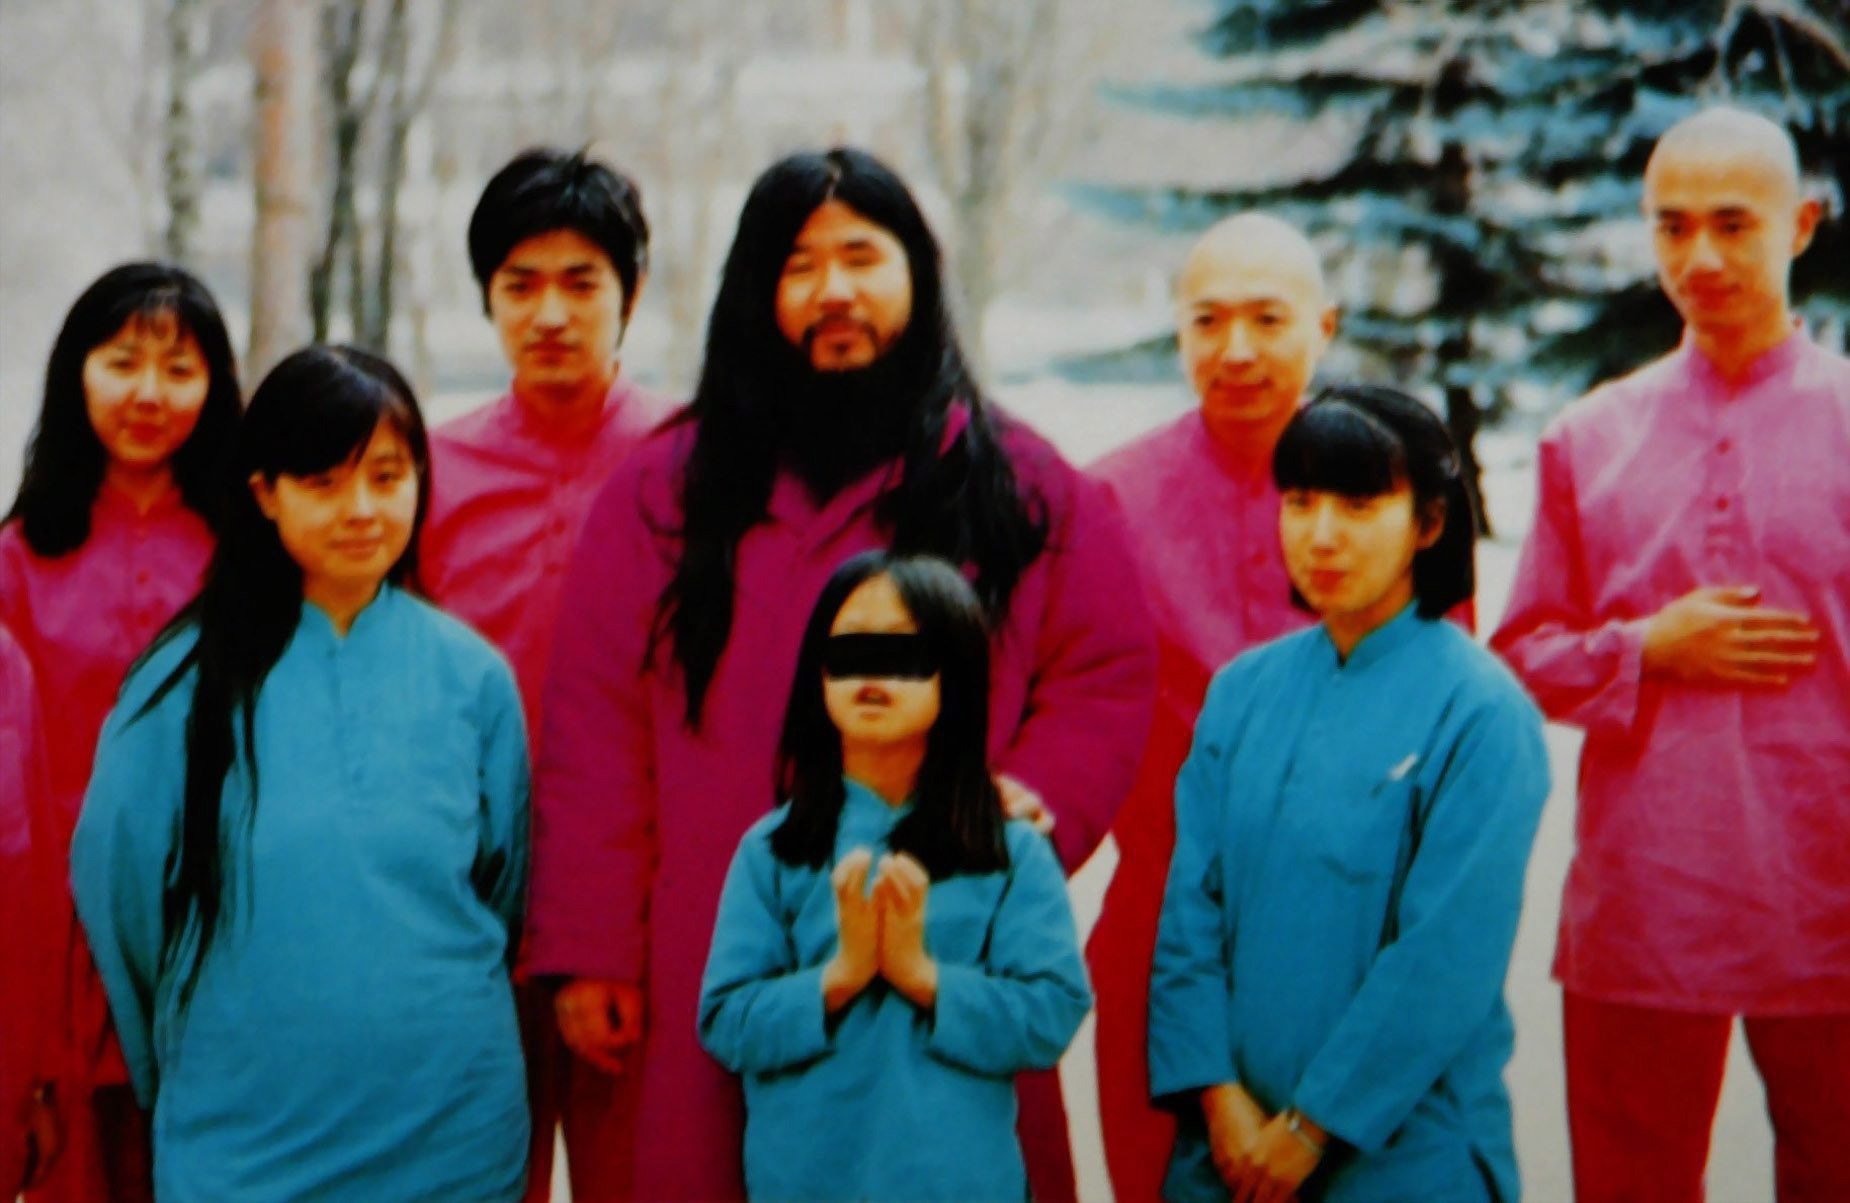 Aum Shinrikyo cult leader Shoko Asahara (centre, back) and members of the group in an undated file photo. Photo: EPA-EFE